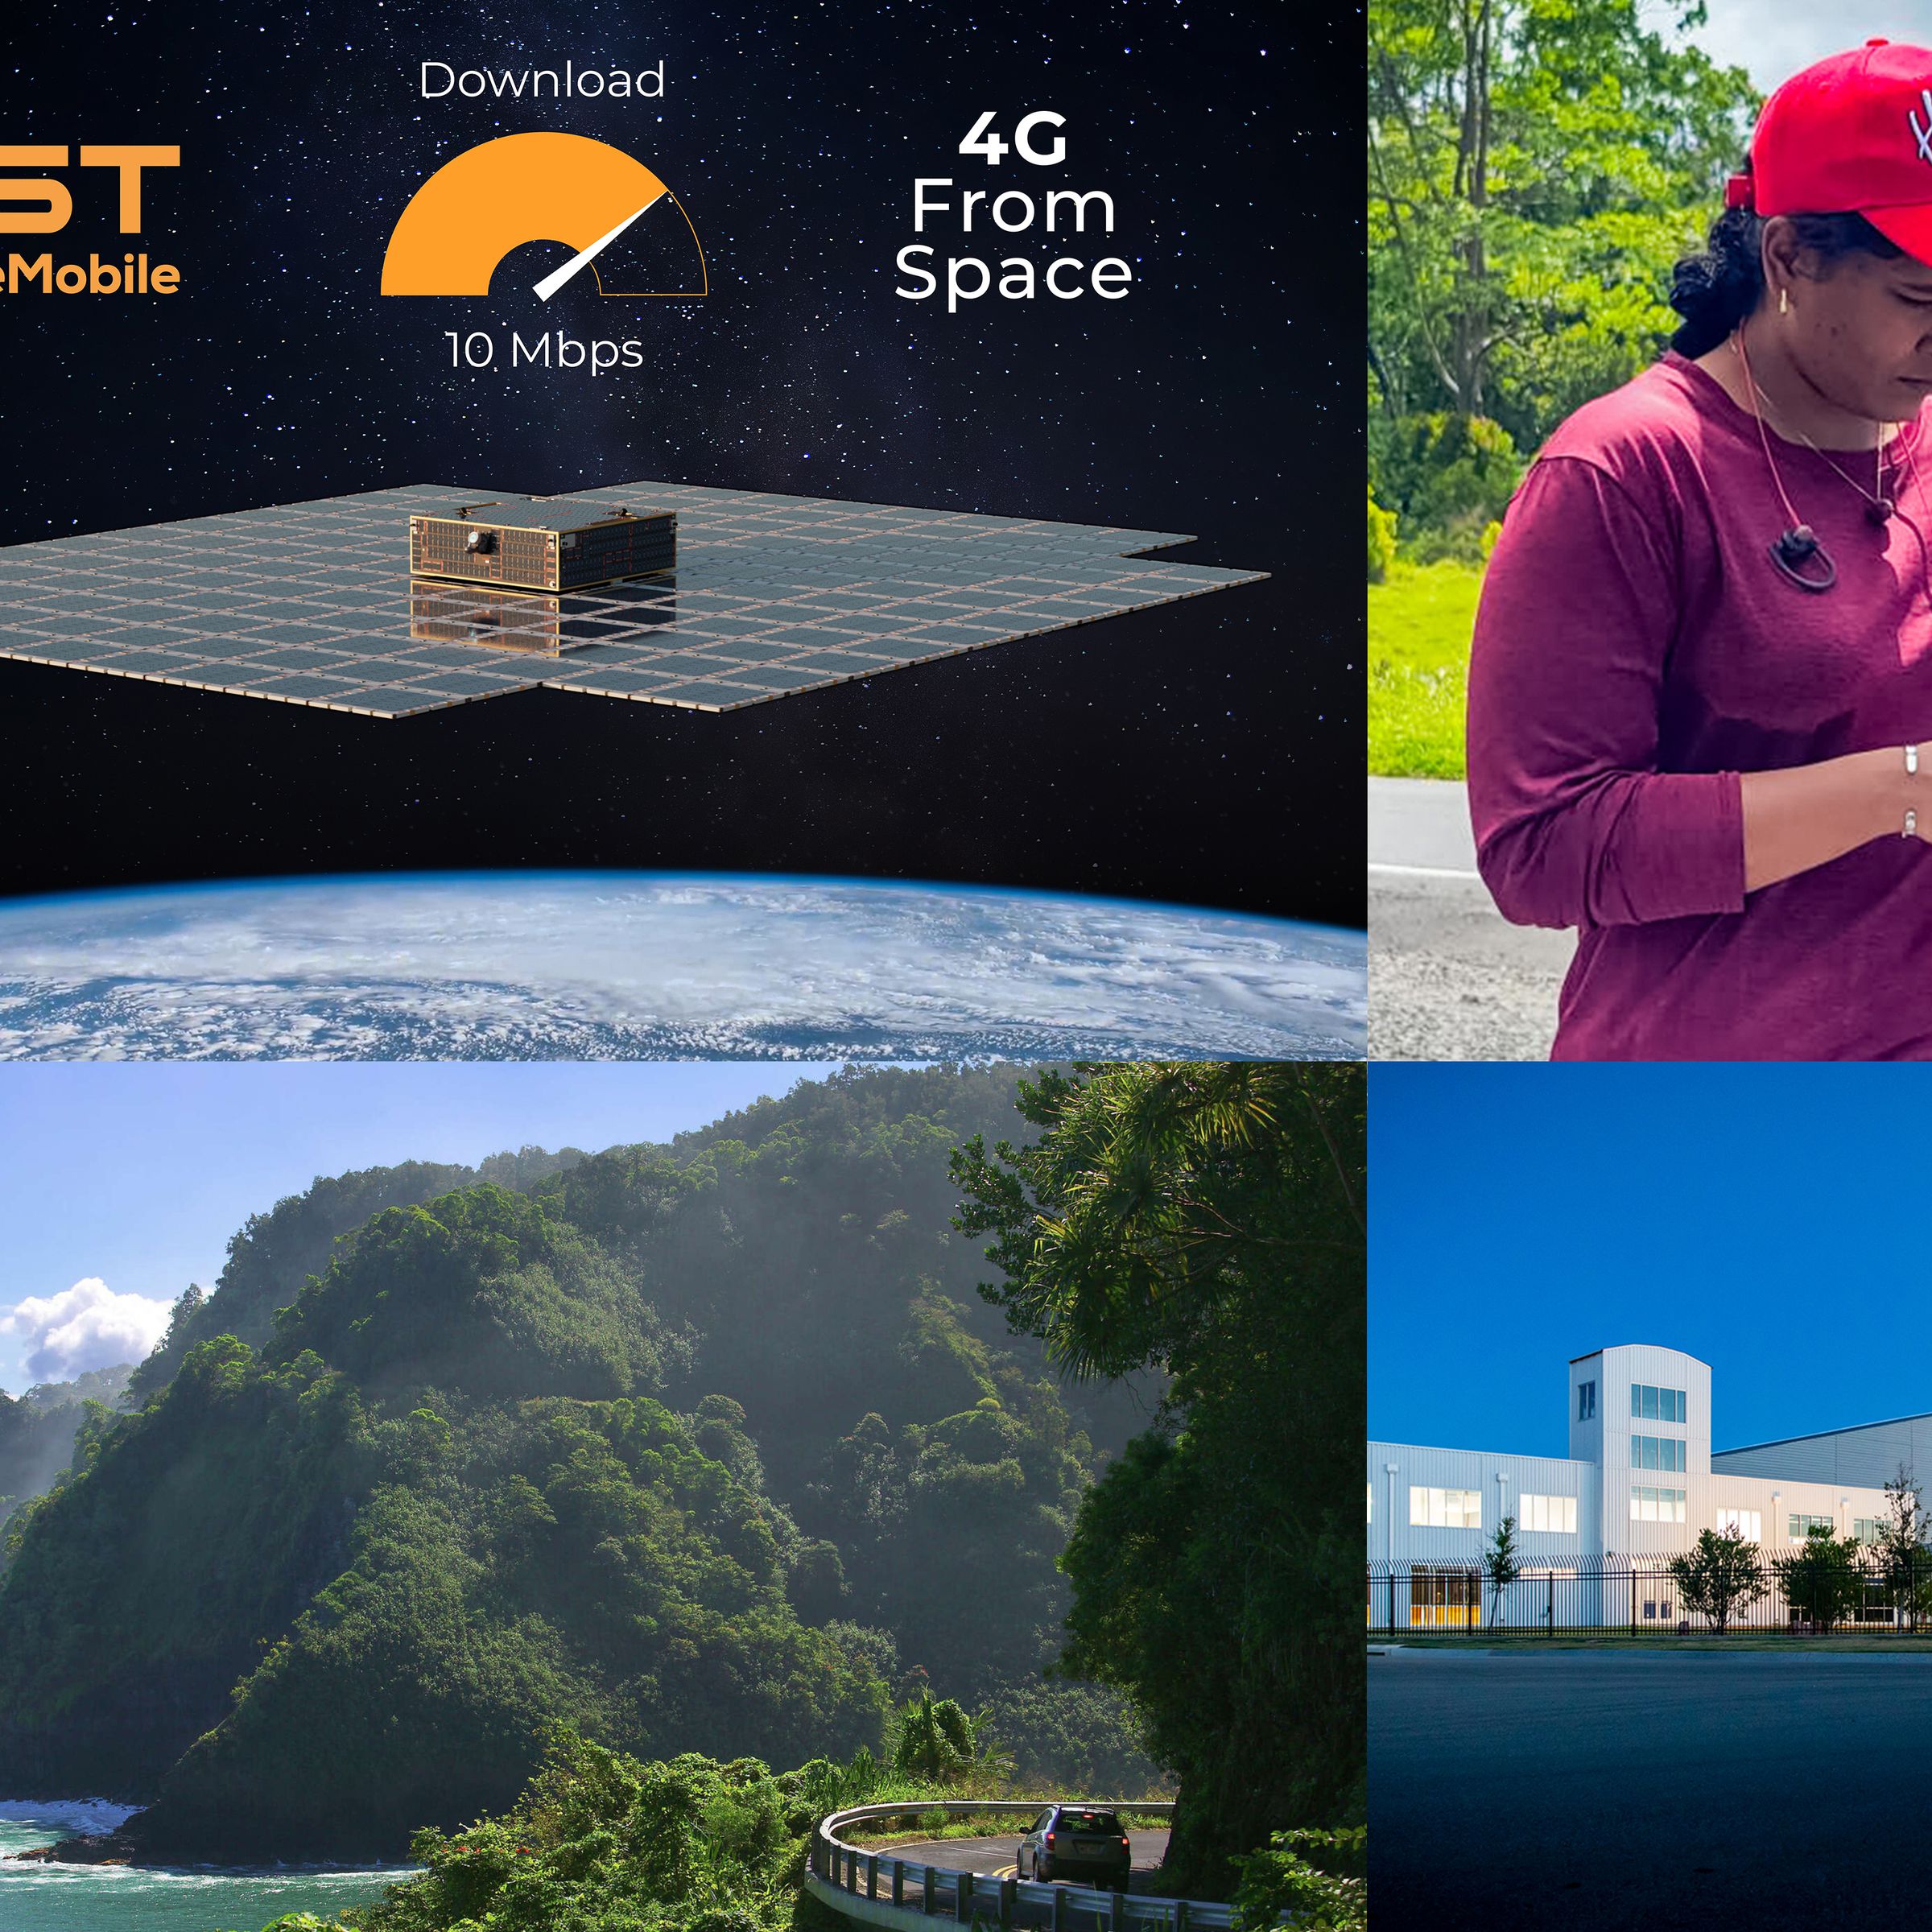 A collage of images showing the satellite array, a person using a cell phone, a hawaiian vista, and an AST building.